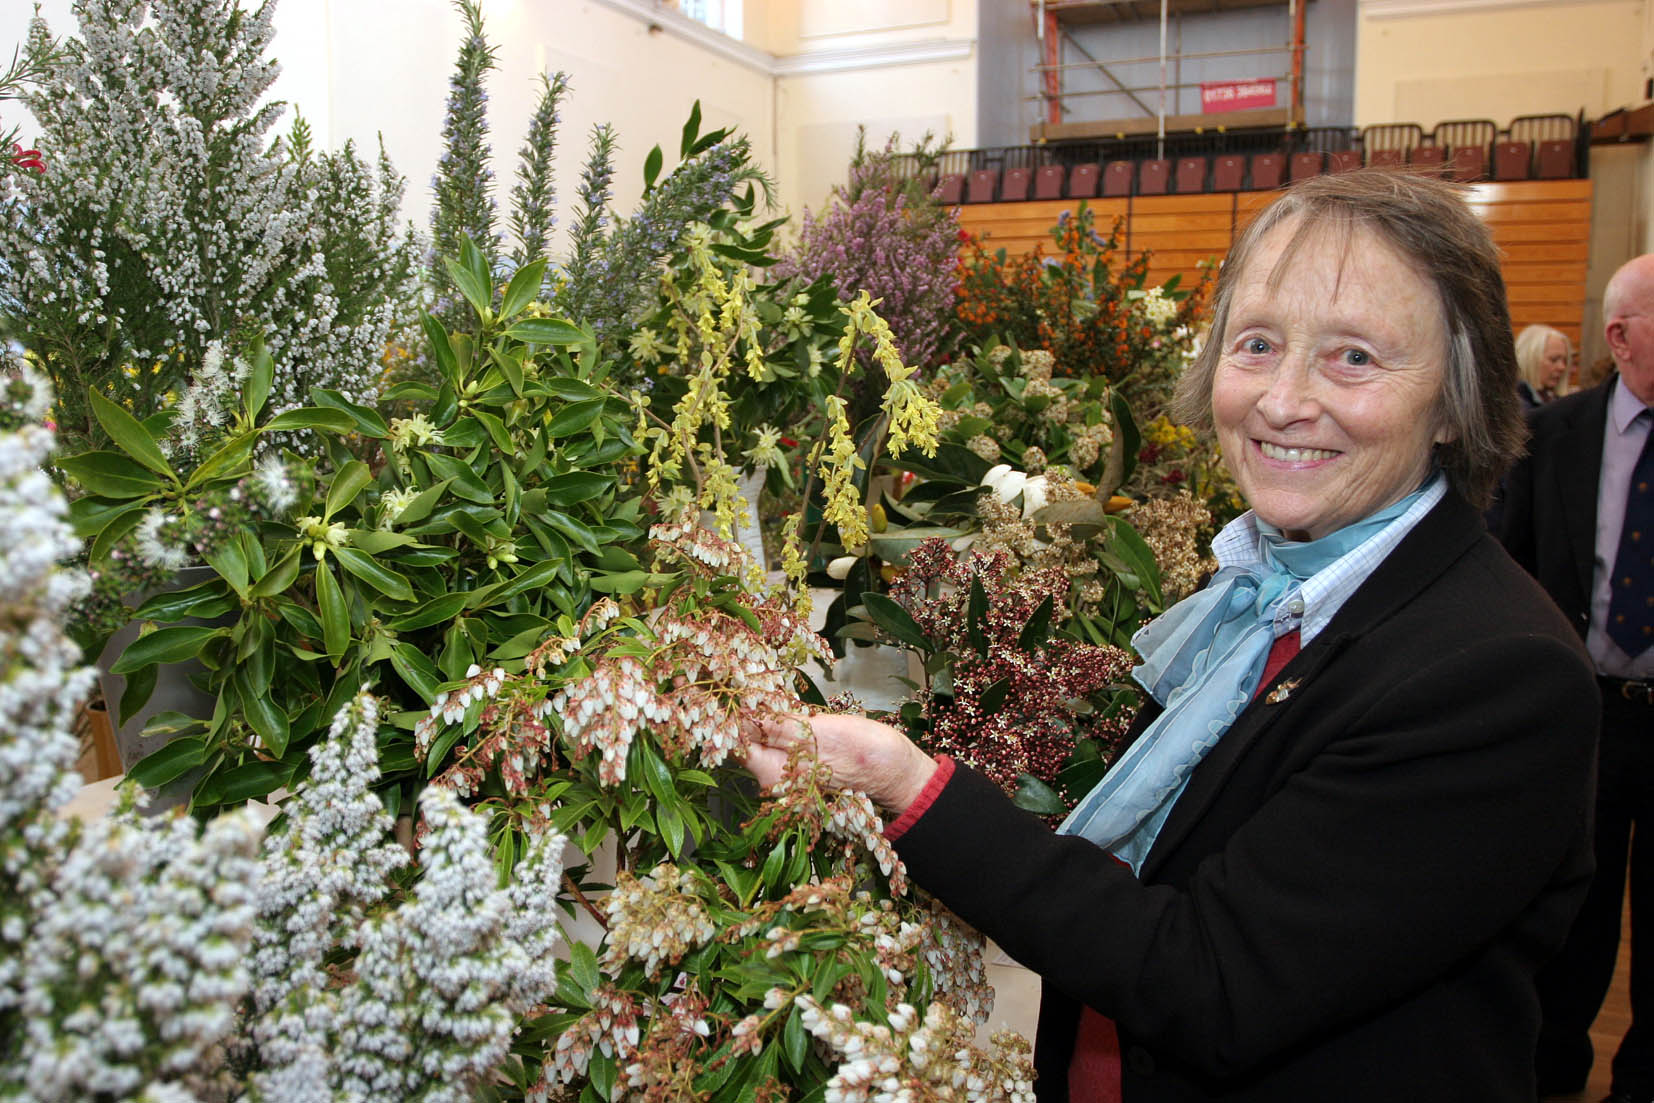 The 84th West Cornwall Spring Show organised by The West Cornwall Horticultural Society in St JohnÕs Hall Penzance. Lady Banham from Penberth Gardens checks her entry of six shrubs which took 1st place in the Ornamental Shrub Section. Pic by Roger Pope/CIOSP